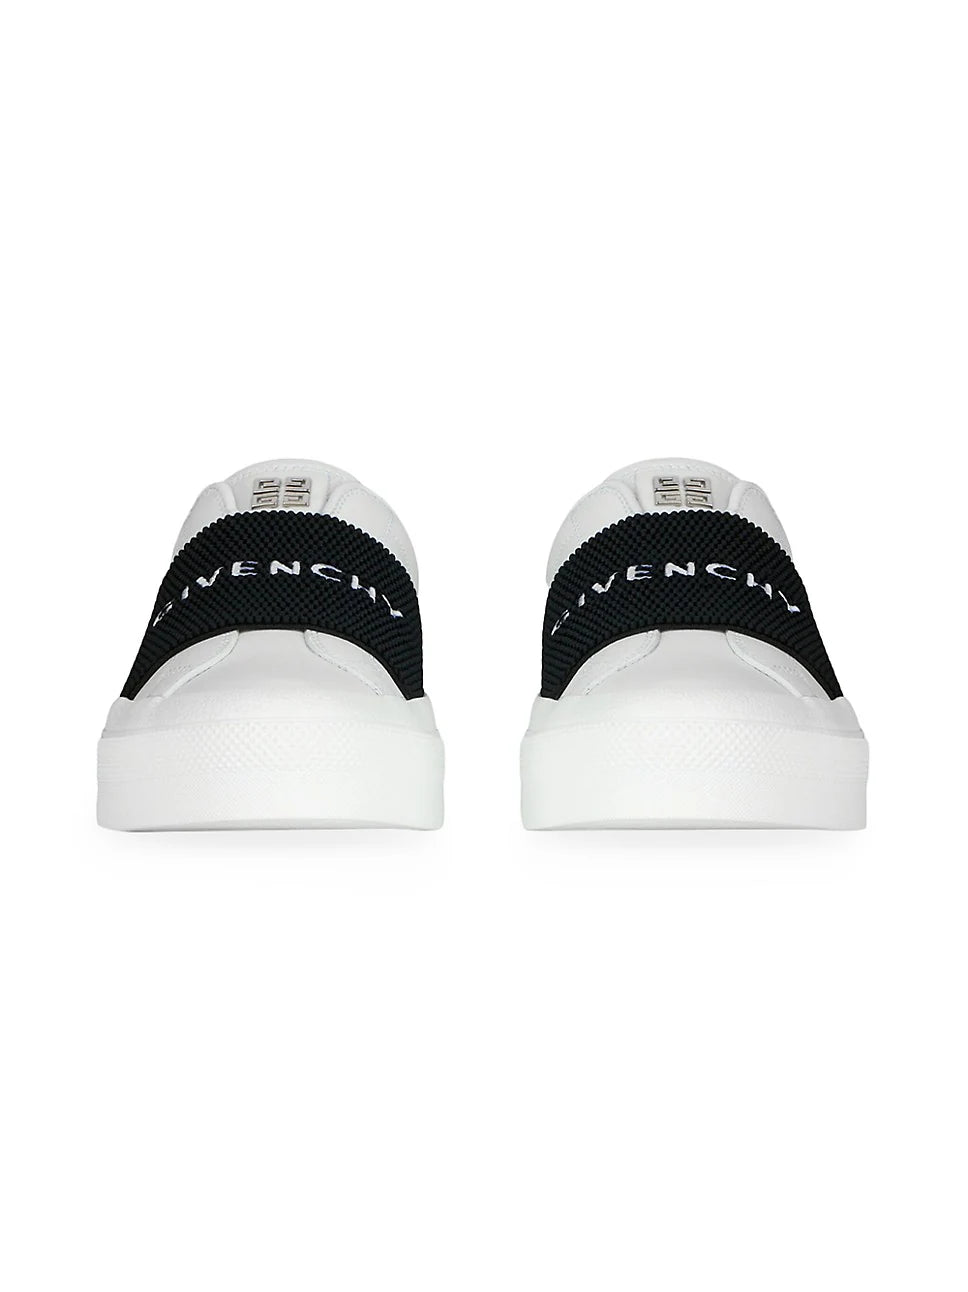 Givenchy City Sport Sneaker